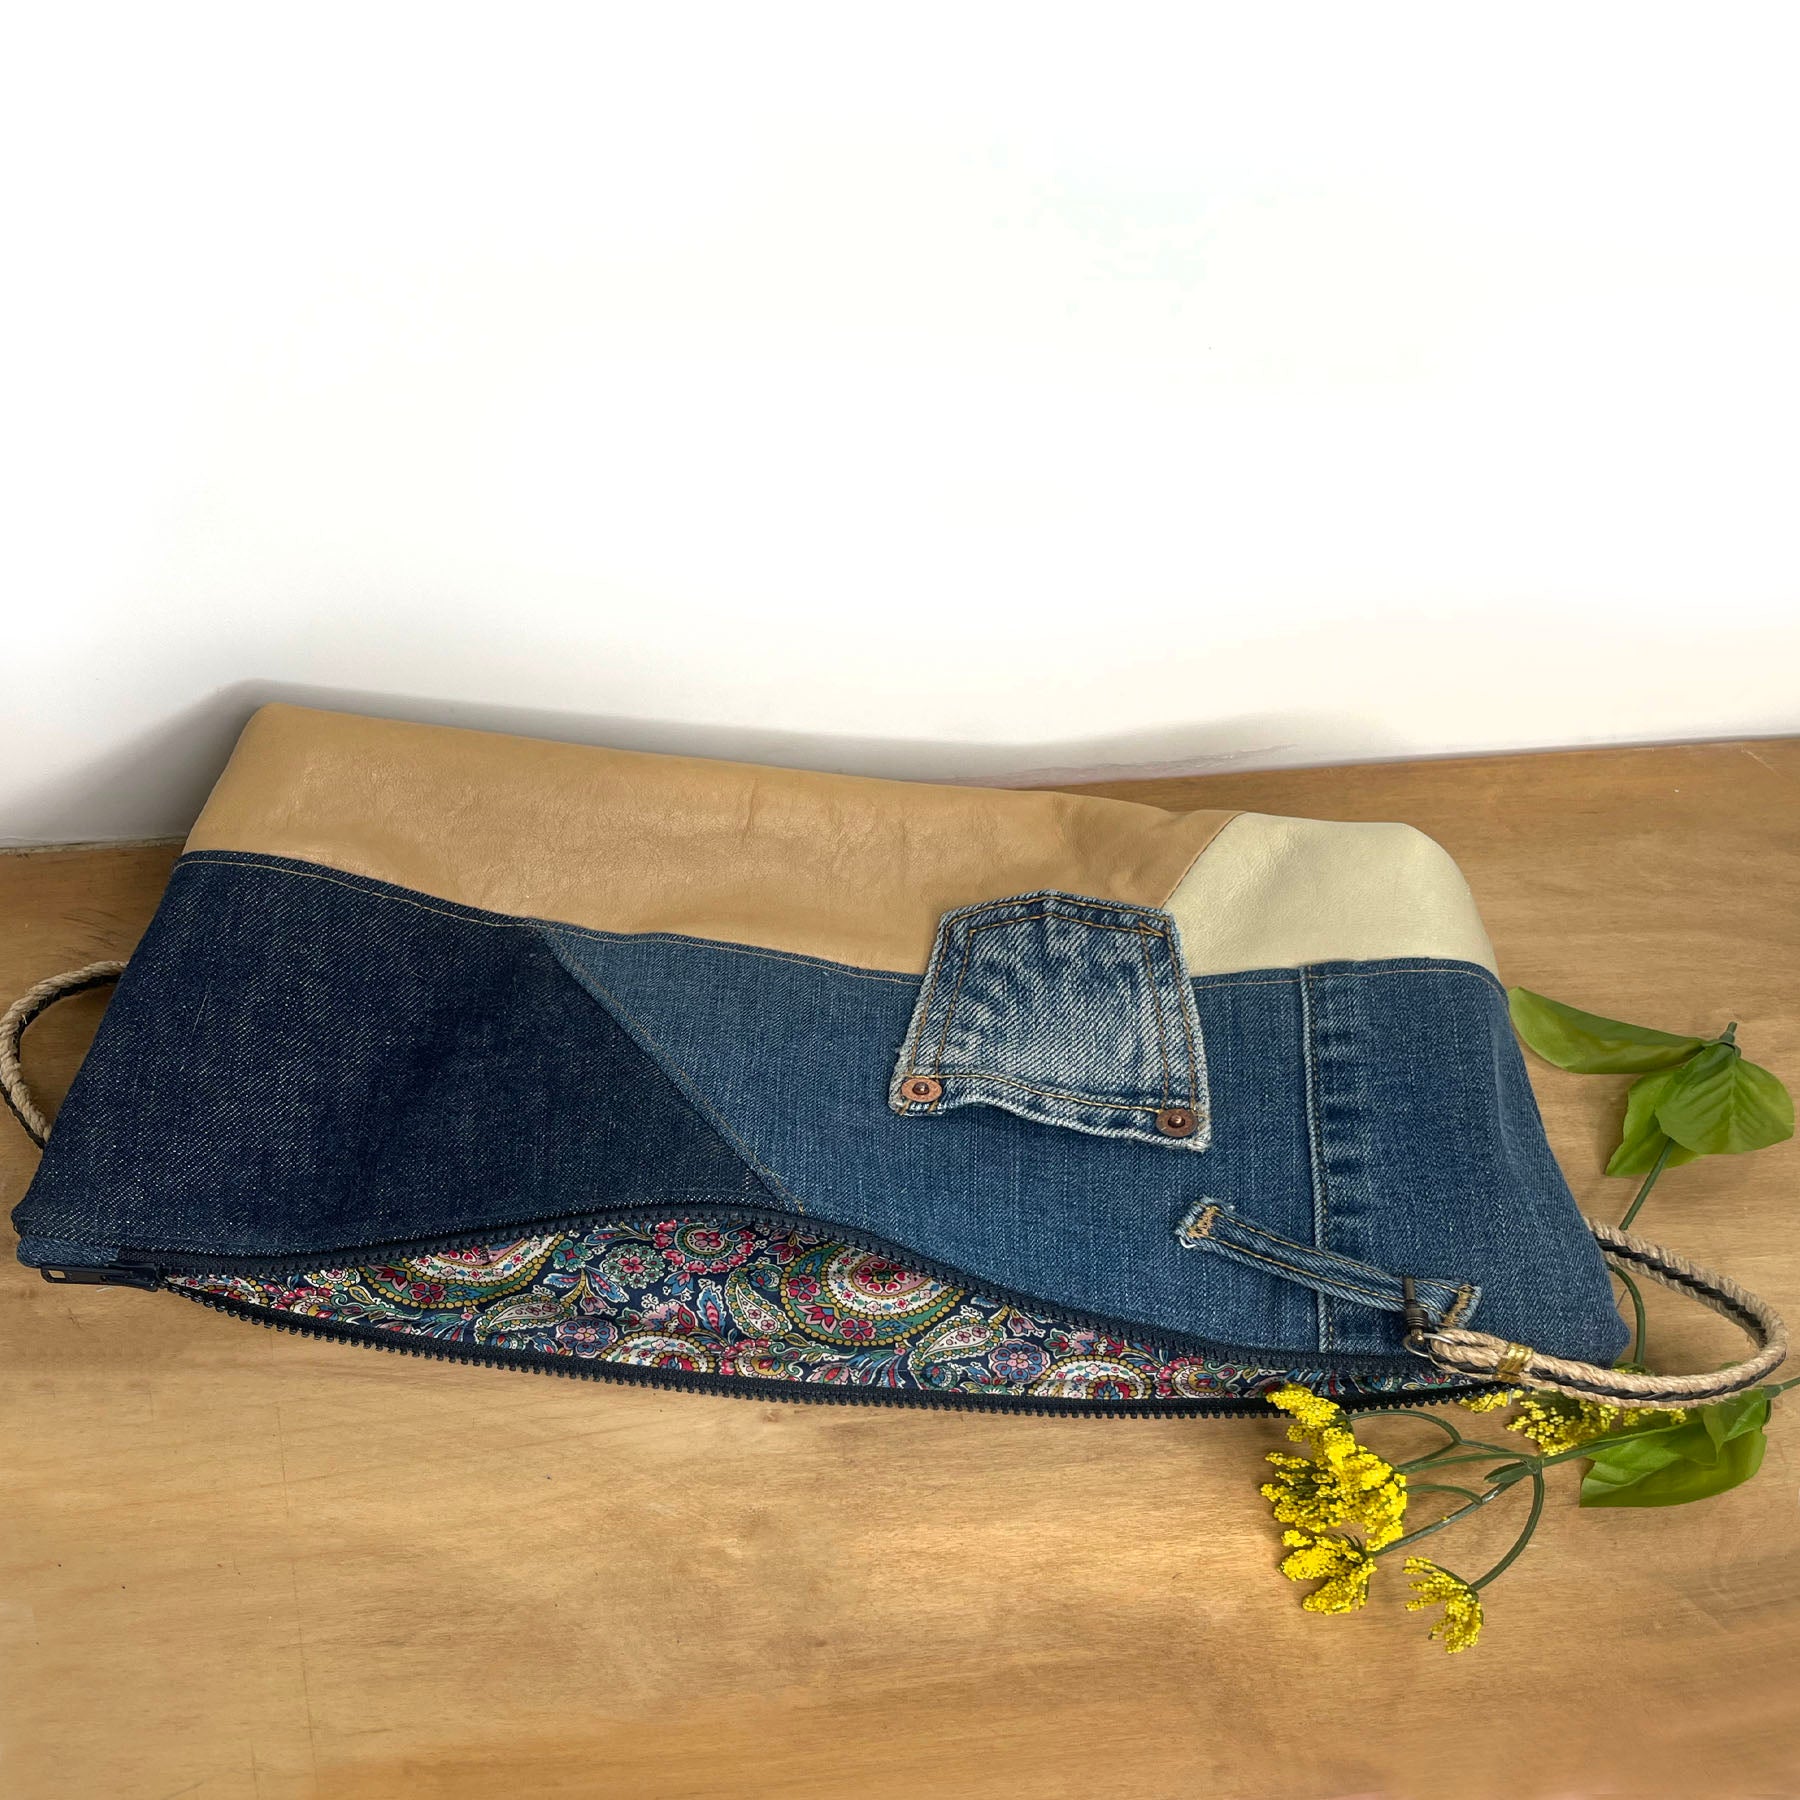 Jeans bag BOSTON , just for you. denim bag in the style of c - Inspire  Uplift